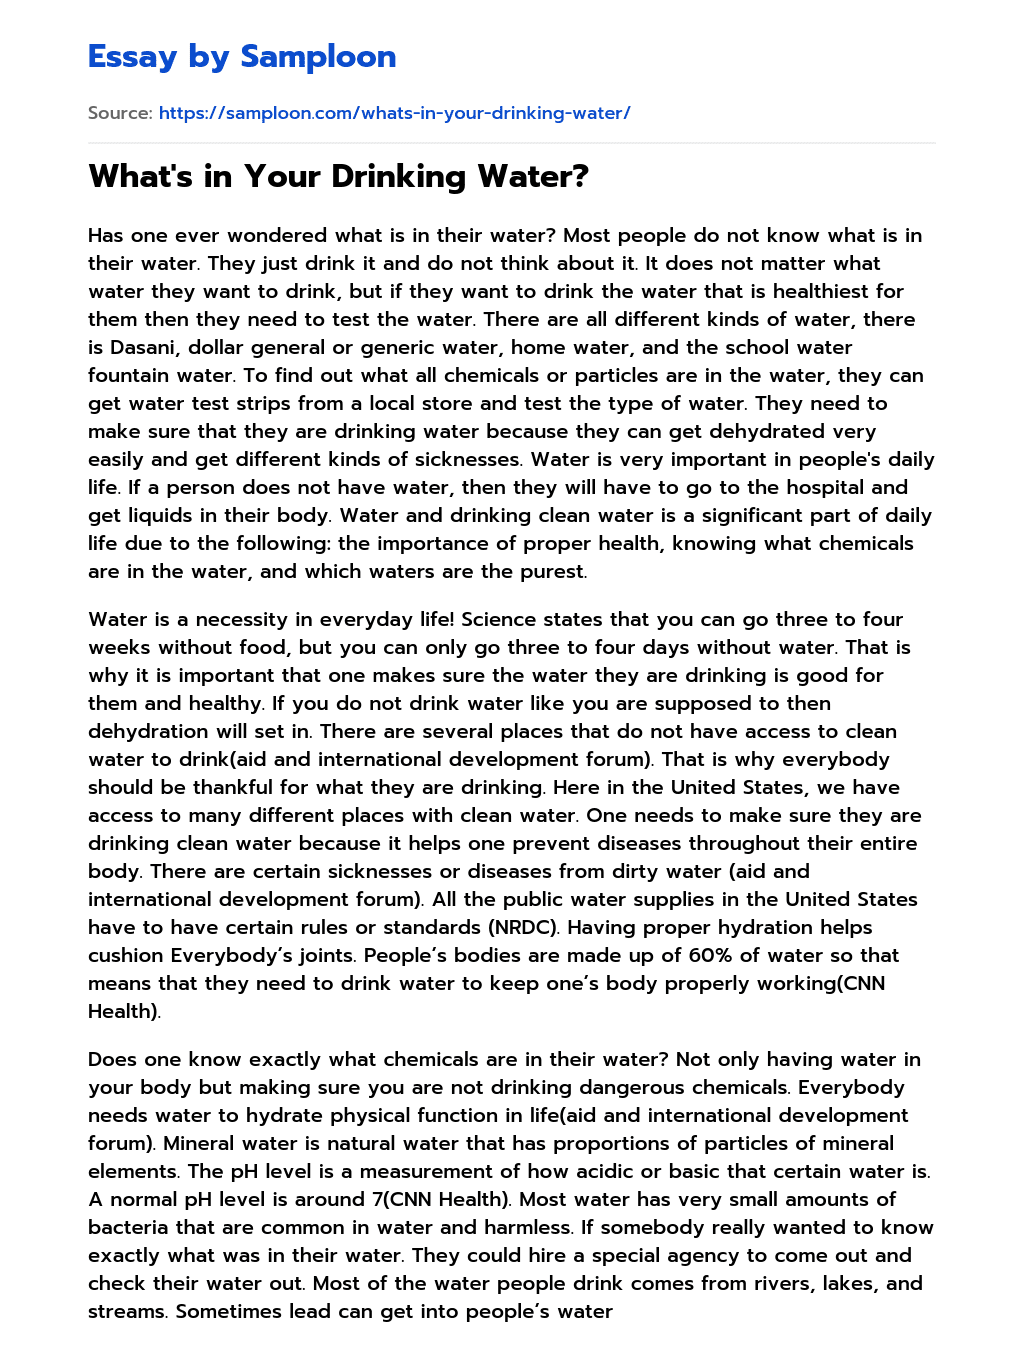 What’s in Your Drinking Water? essay